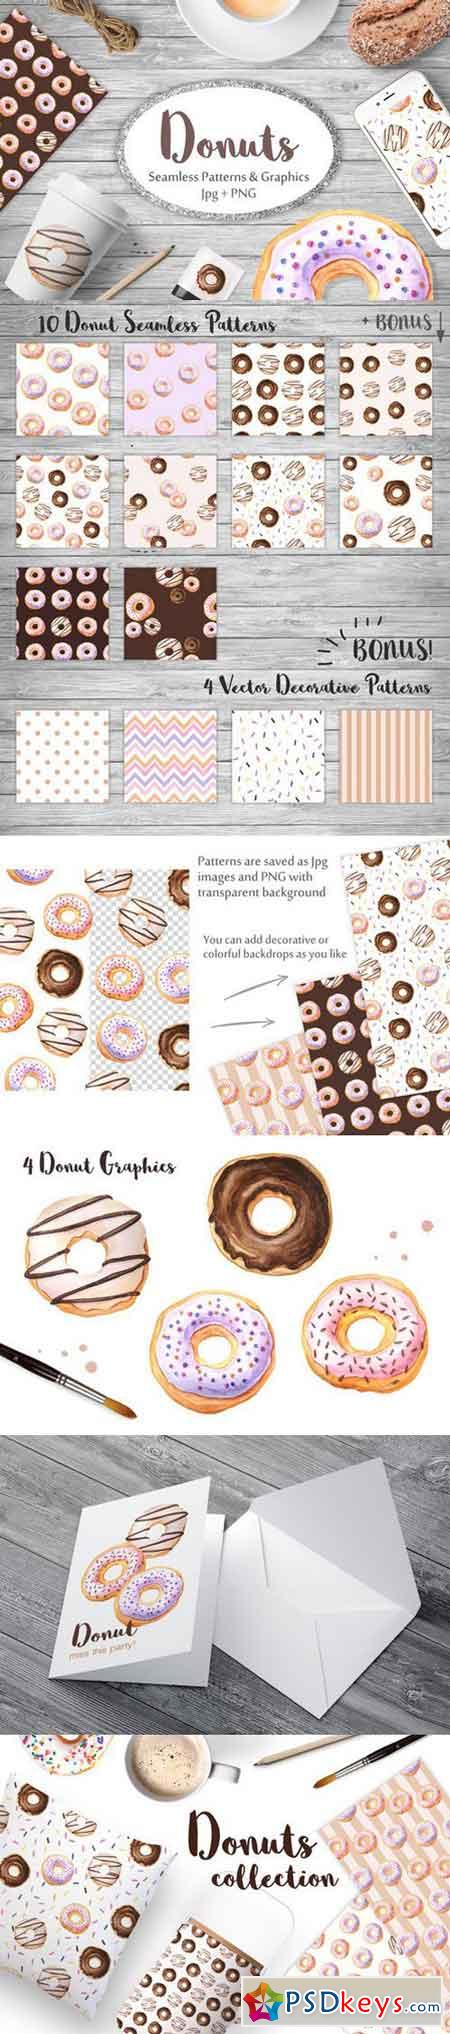 Watercolor Donuts Patterns&Graphics 650765